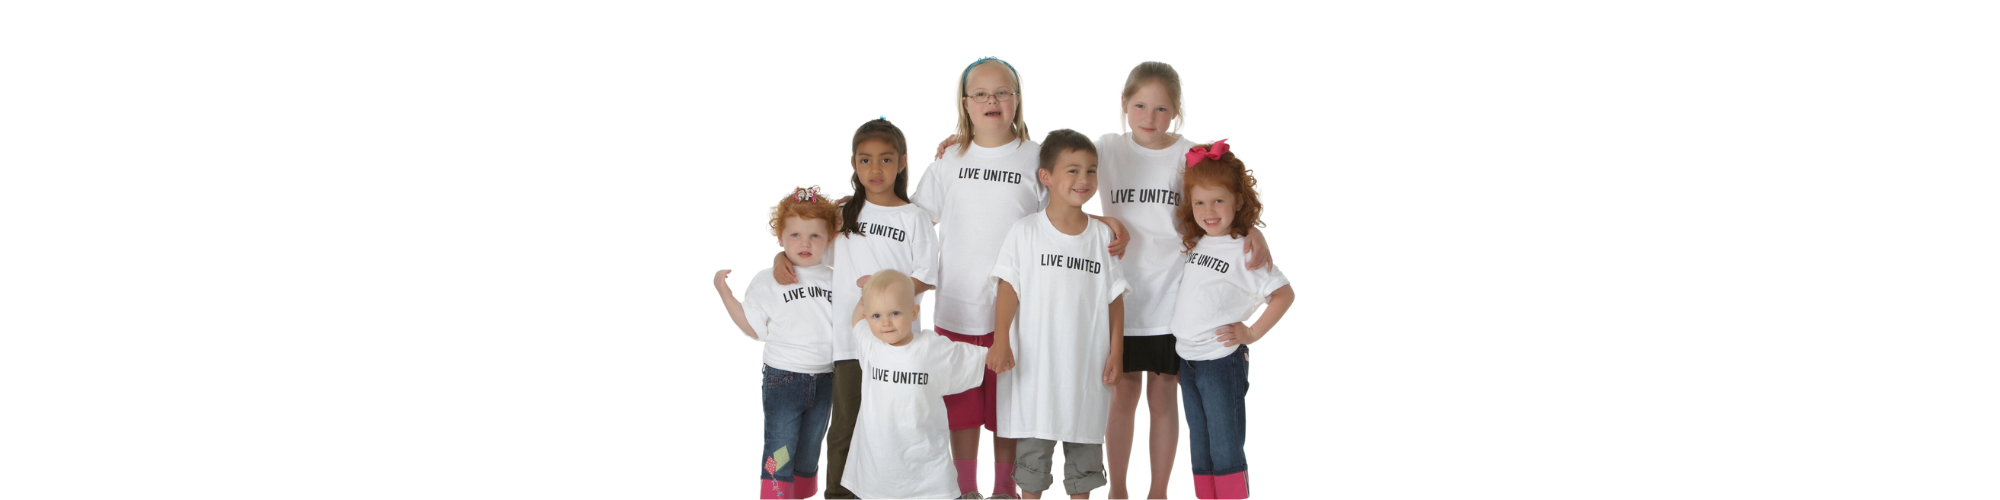 young children smiling in LIVE United T-shirts